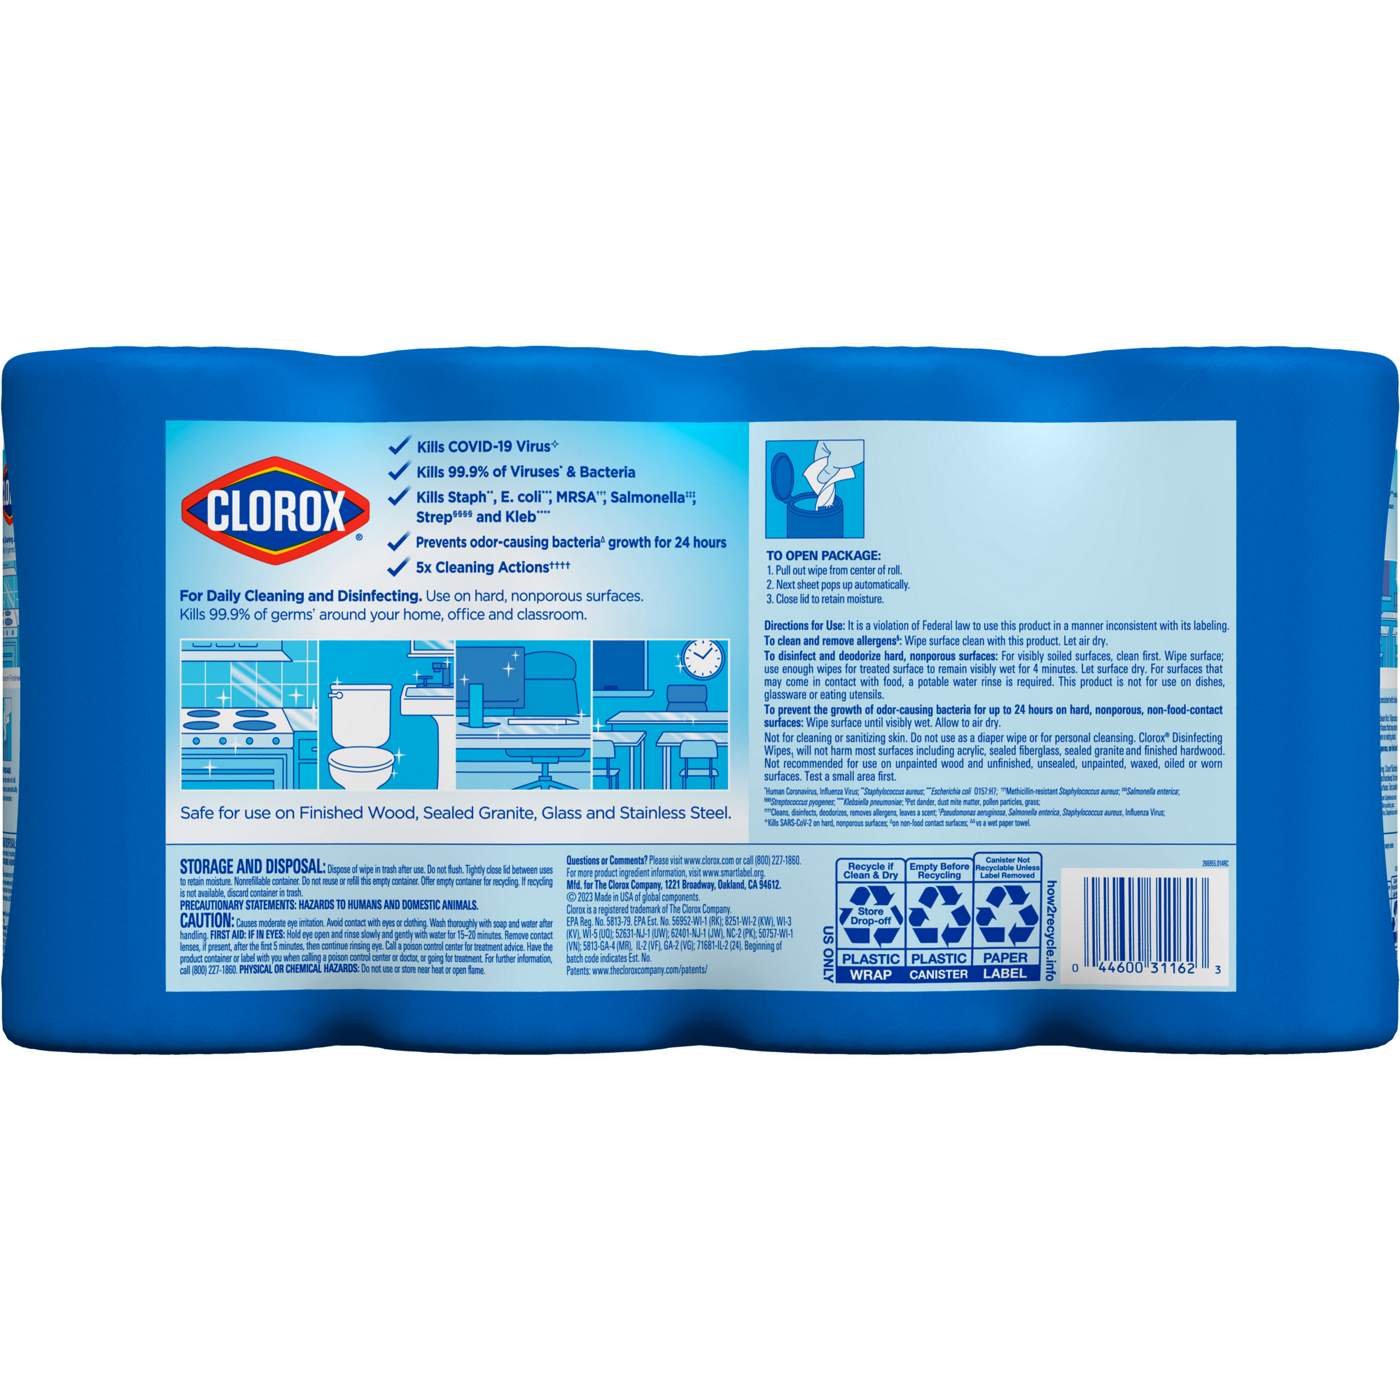 Clorox Disinfecting Wipes Value 4 Pack - Bleach Free Cleaning Wipes; image 8 of 9